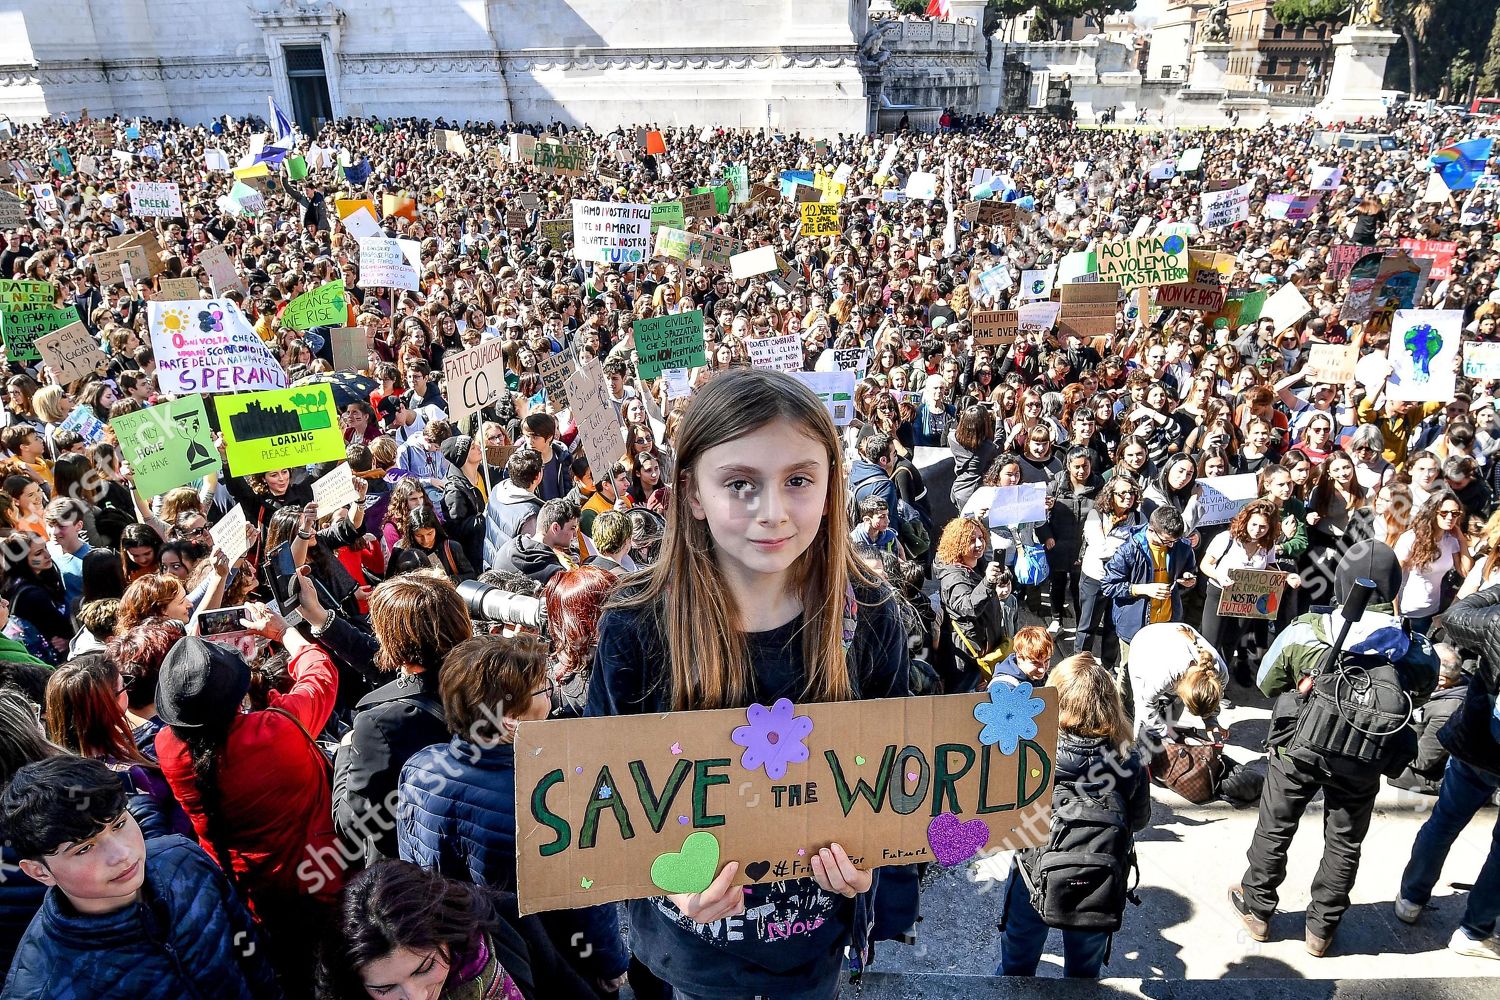 Mandatory Credit: Photo by ALESSANDRO DI MEO/EPA-EFE/Shutterstock (10156657e)
Alice Imbastari, the youngest girl who takes part in the demonstration against global warming 'Global Climate Strike', in Rome, Italy, 15 March 2019. Students from several schools across the city are taking part in a massive global student strike movement called '#FridayForFuture' which was sparked by Greta Thunberg of Sweden, a sixteen year old climate activist who has been protesting outside the Swedish parliament every Friday since August 2018.
'Global Climate Strike' rally in Rome, Italy - 15 Mar 2019